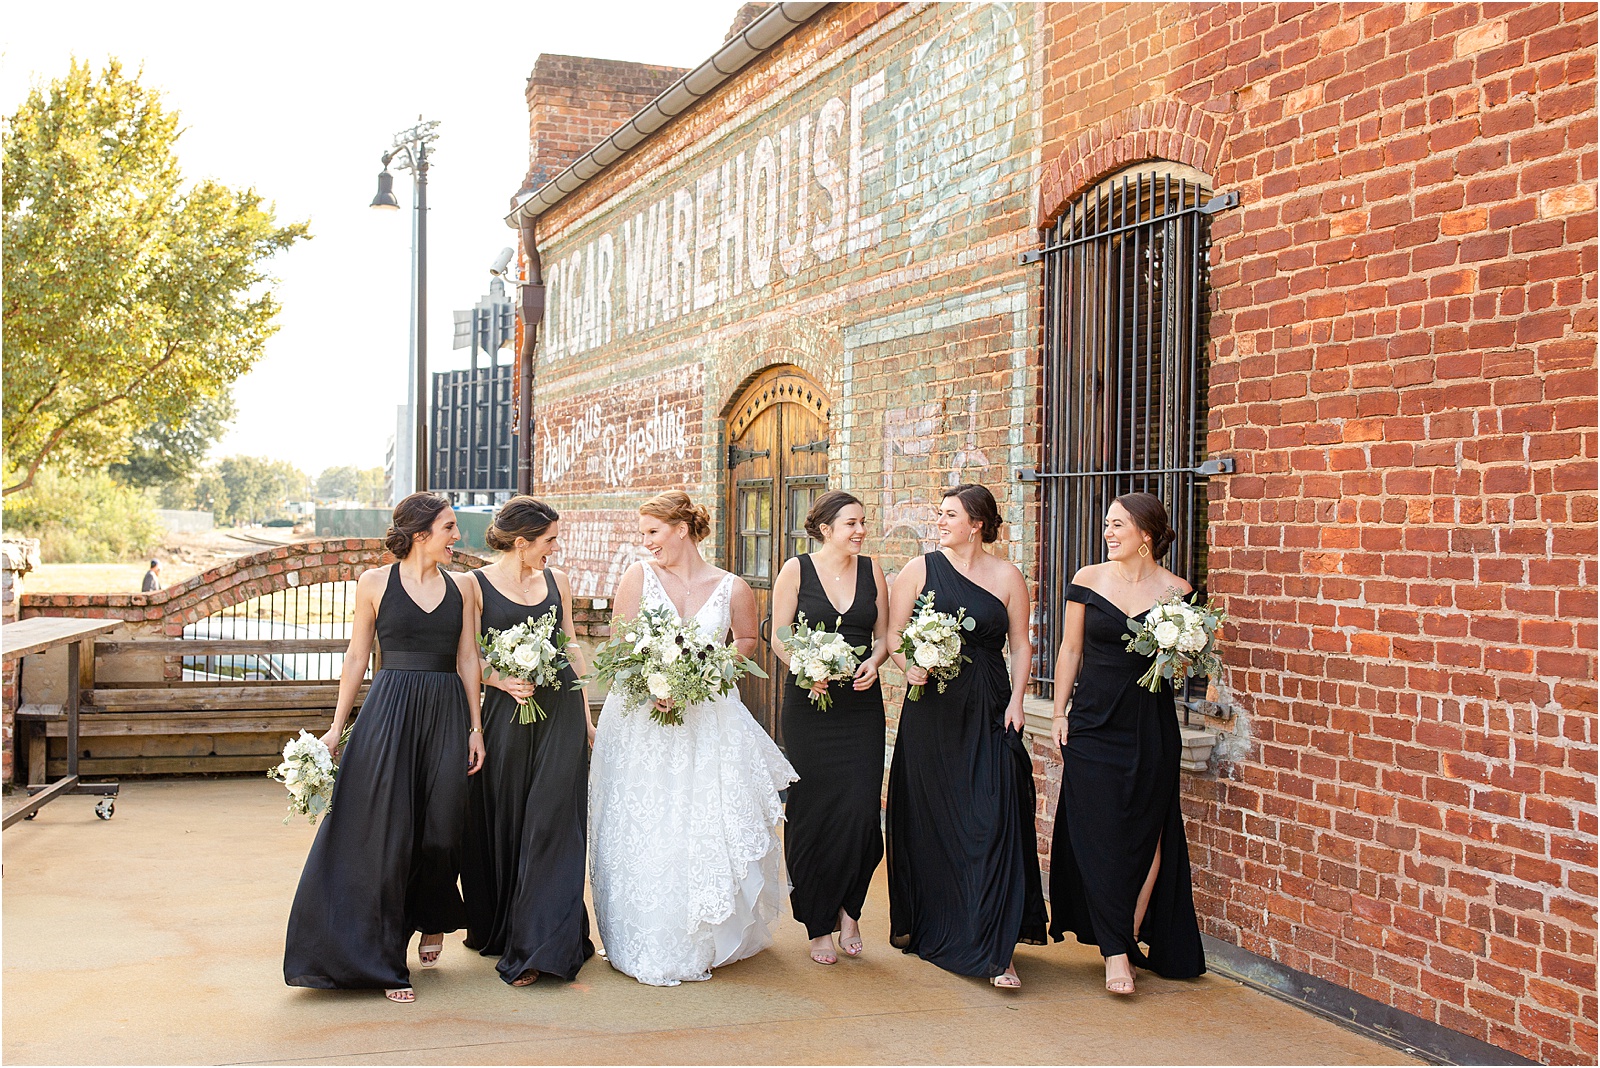 Bride walking with her bridesmaids outside Old Cigar Warehouse